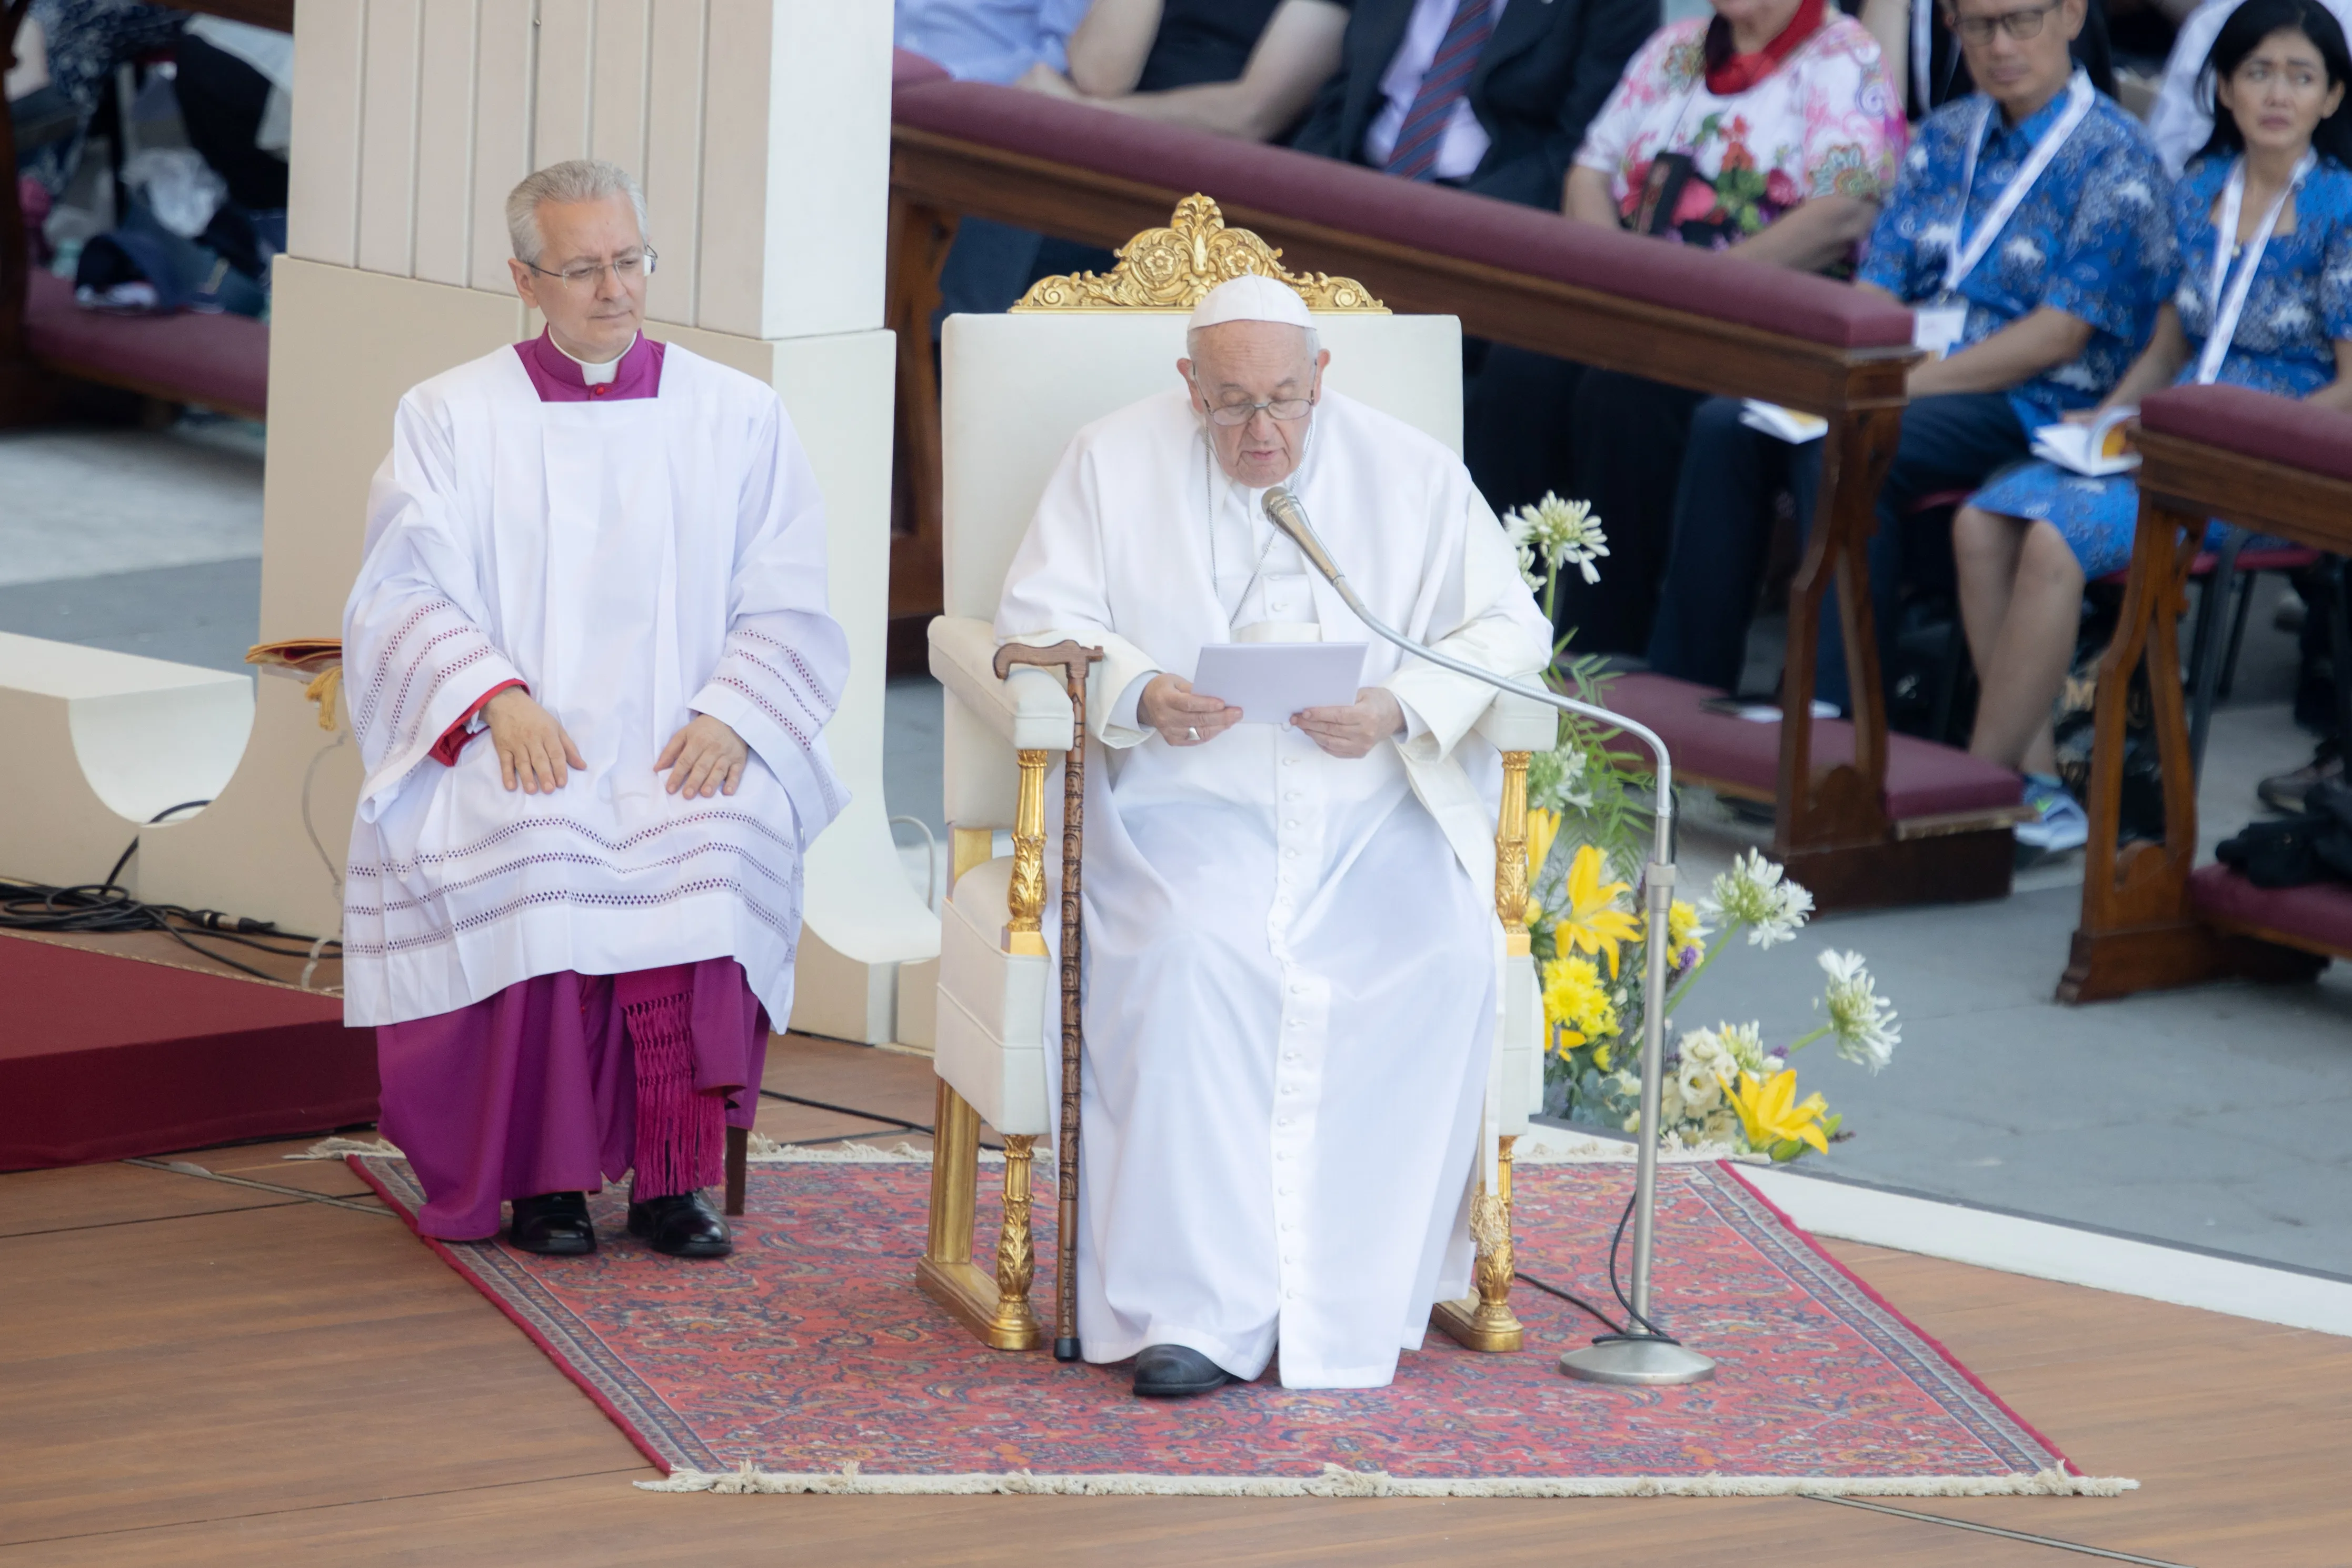 Pope Francis at Mass for the World Meeting of Families 2022 in St. Peter's Square.?w=200&h=150